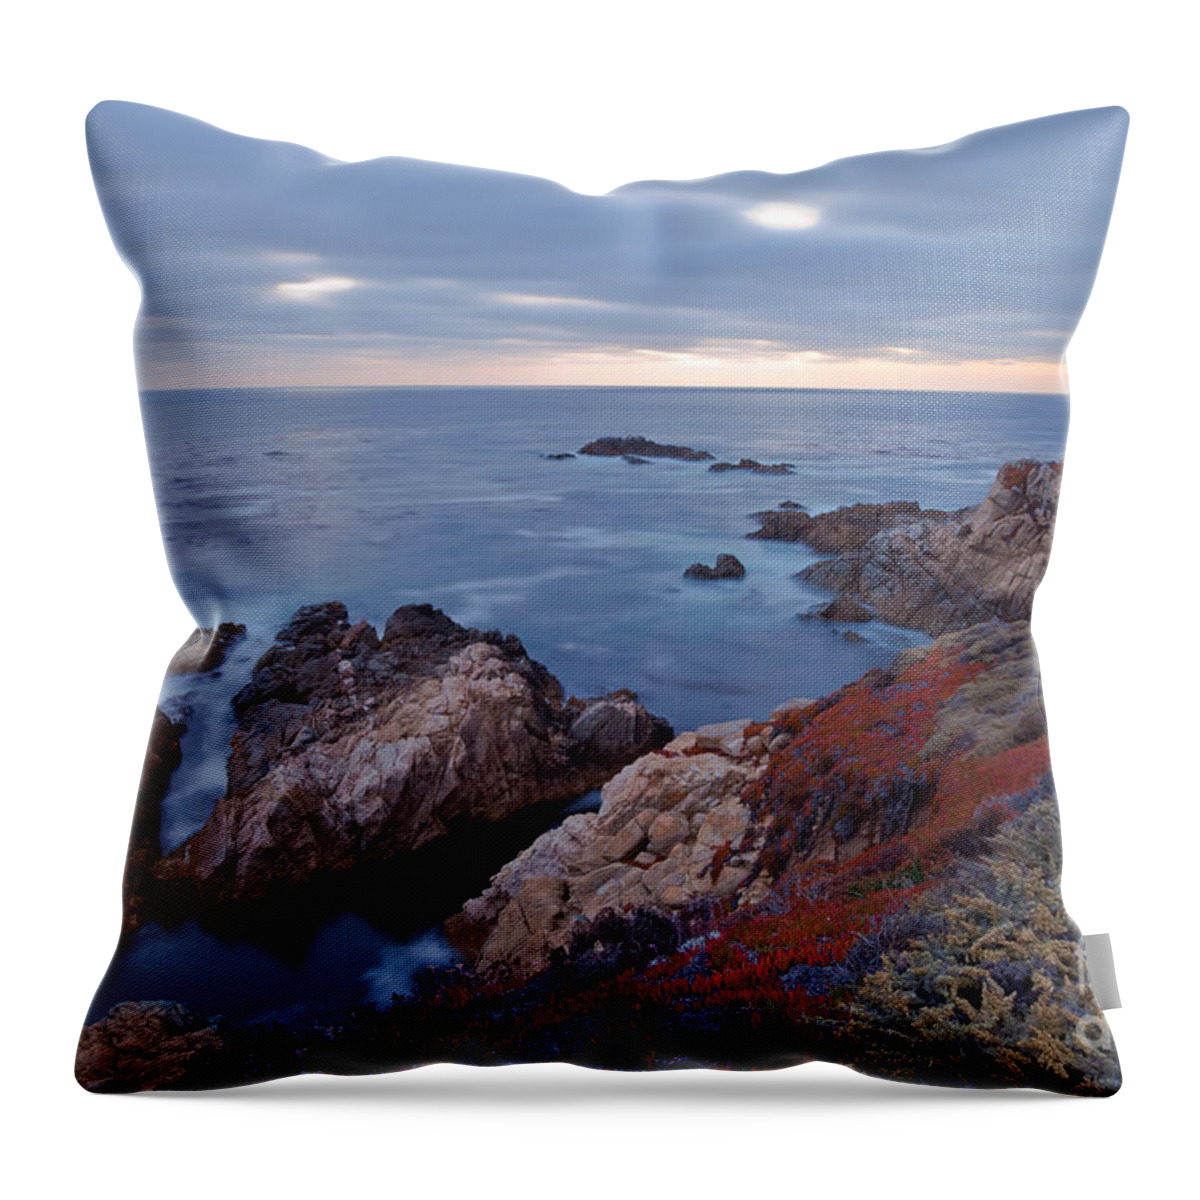 Landscape Throw Pillow featuring the photograph The Red Carpet by Jonathan Nguyen